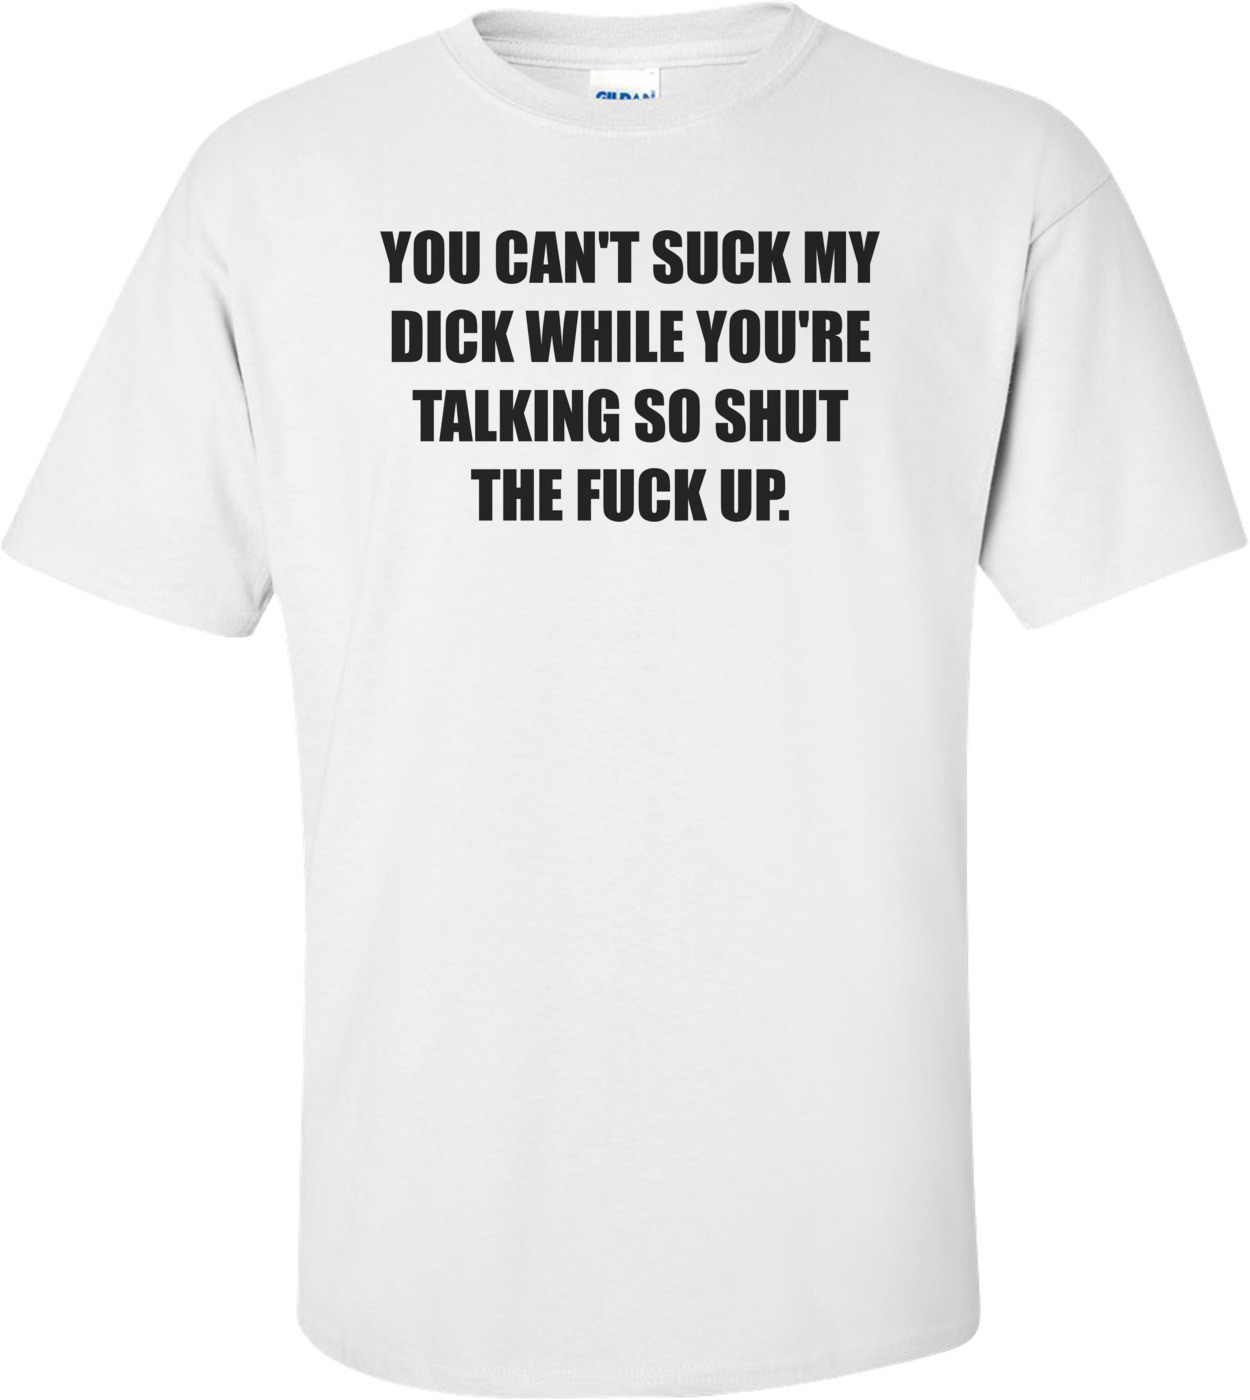 YOU CAN'T SUCK MY DICK WHILE YOU'RE TALKING SO SHUT THE FUCK UP. Shirt